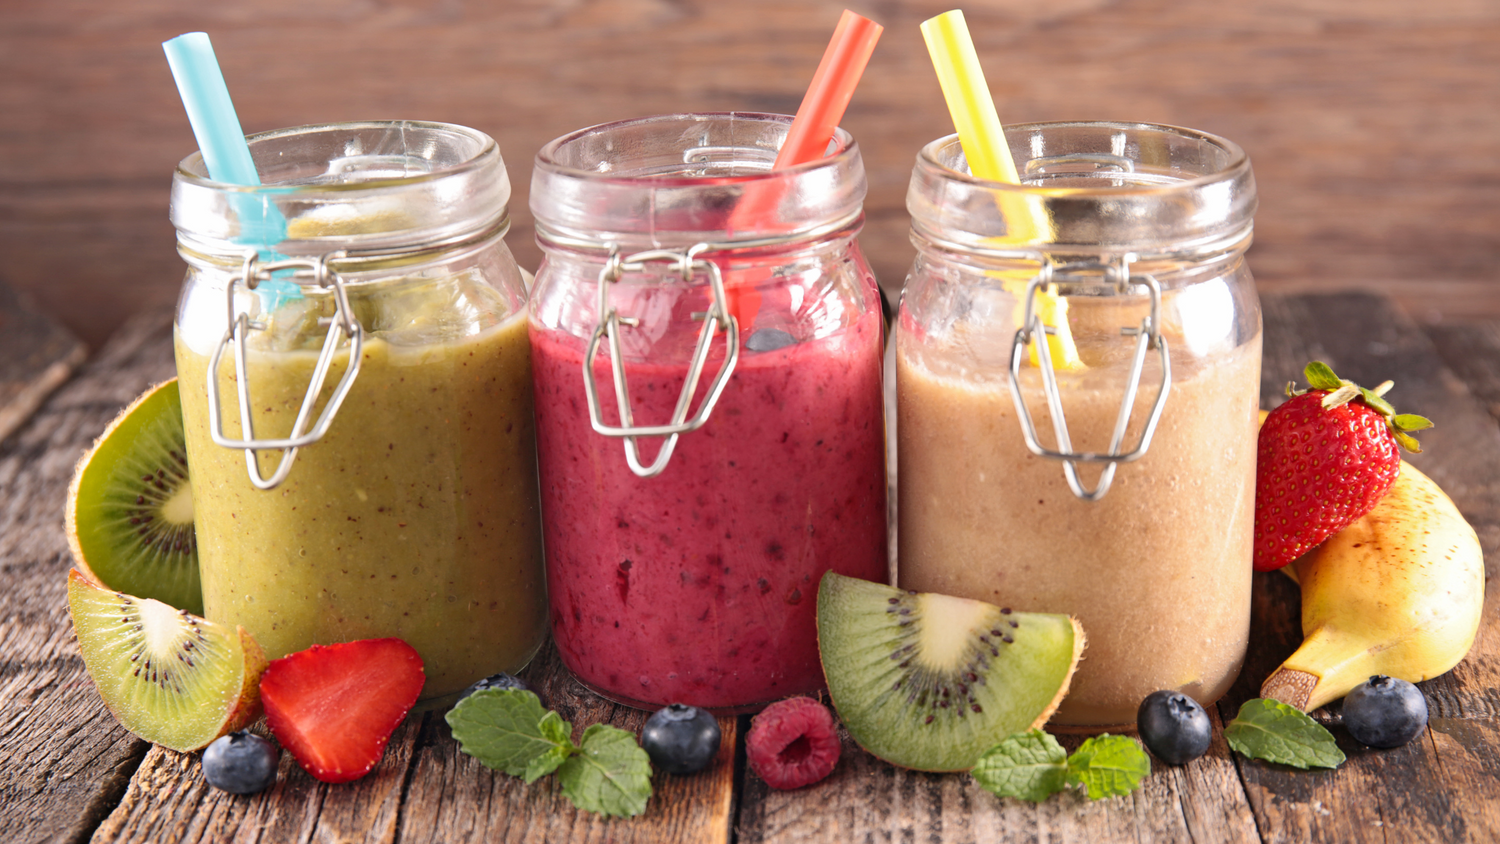 10 Best Smoothie Recipes That Will Elevate Your Health and Taste Buds